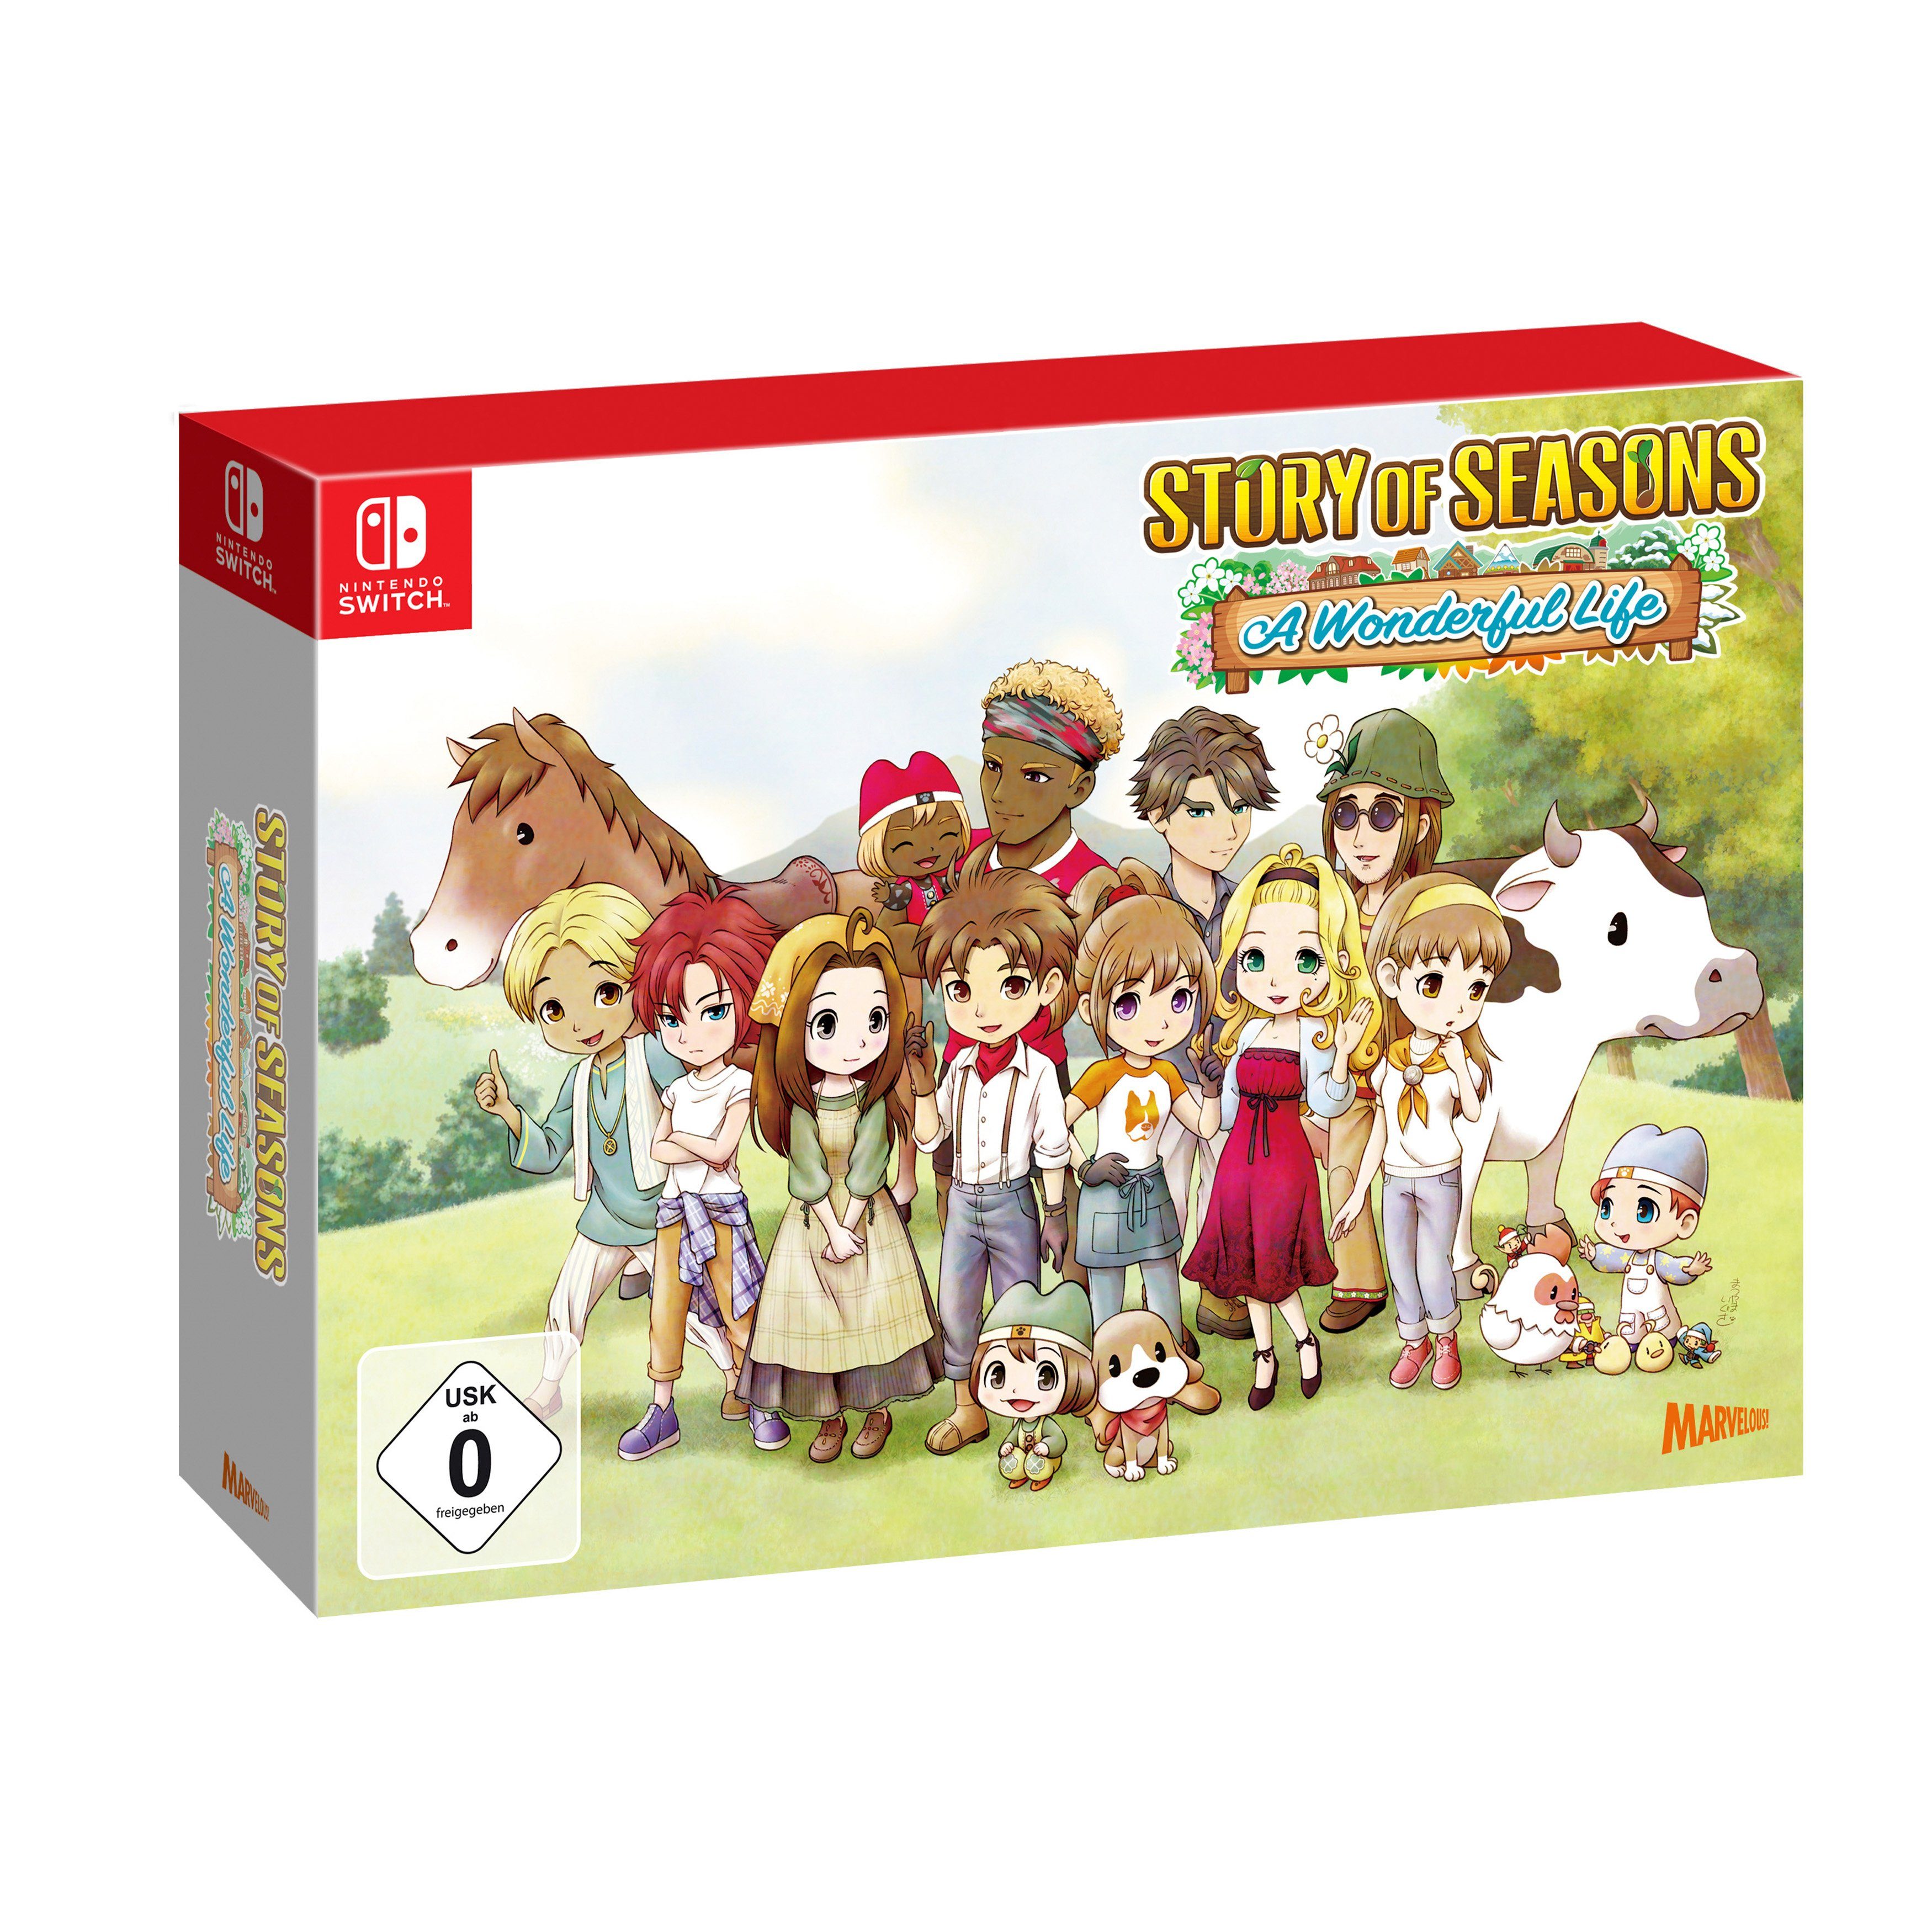 Edition Seasons: Nintendo Life Limited Wonderful Switch, Story Limited Edition of A